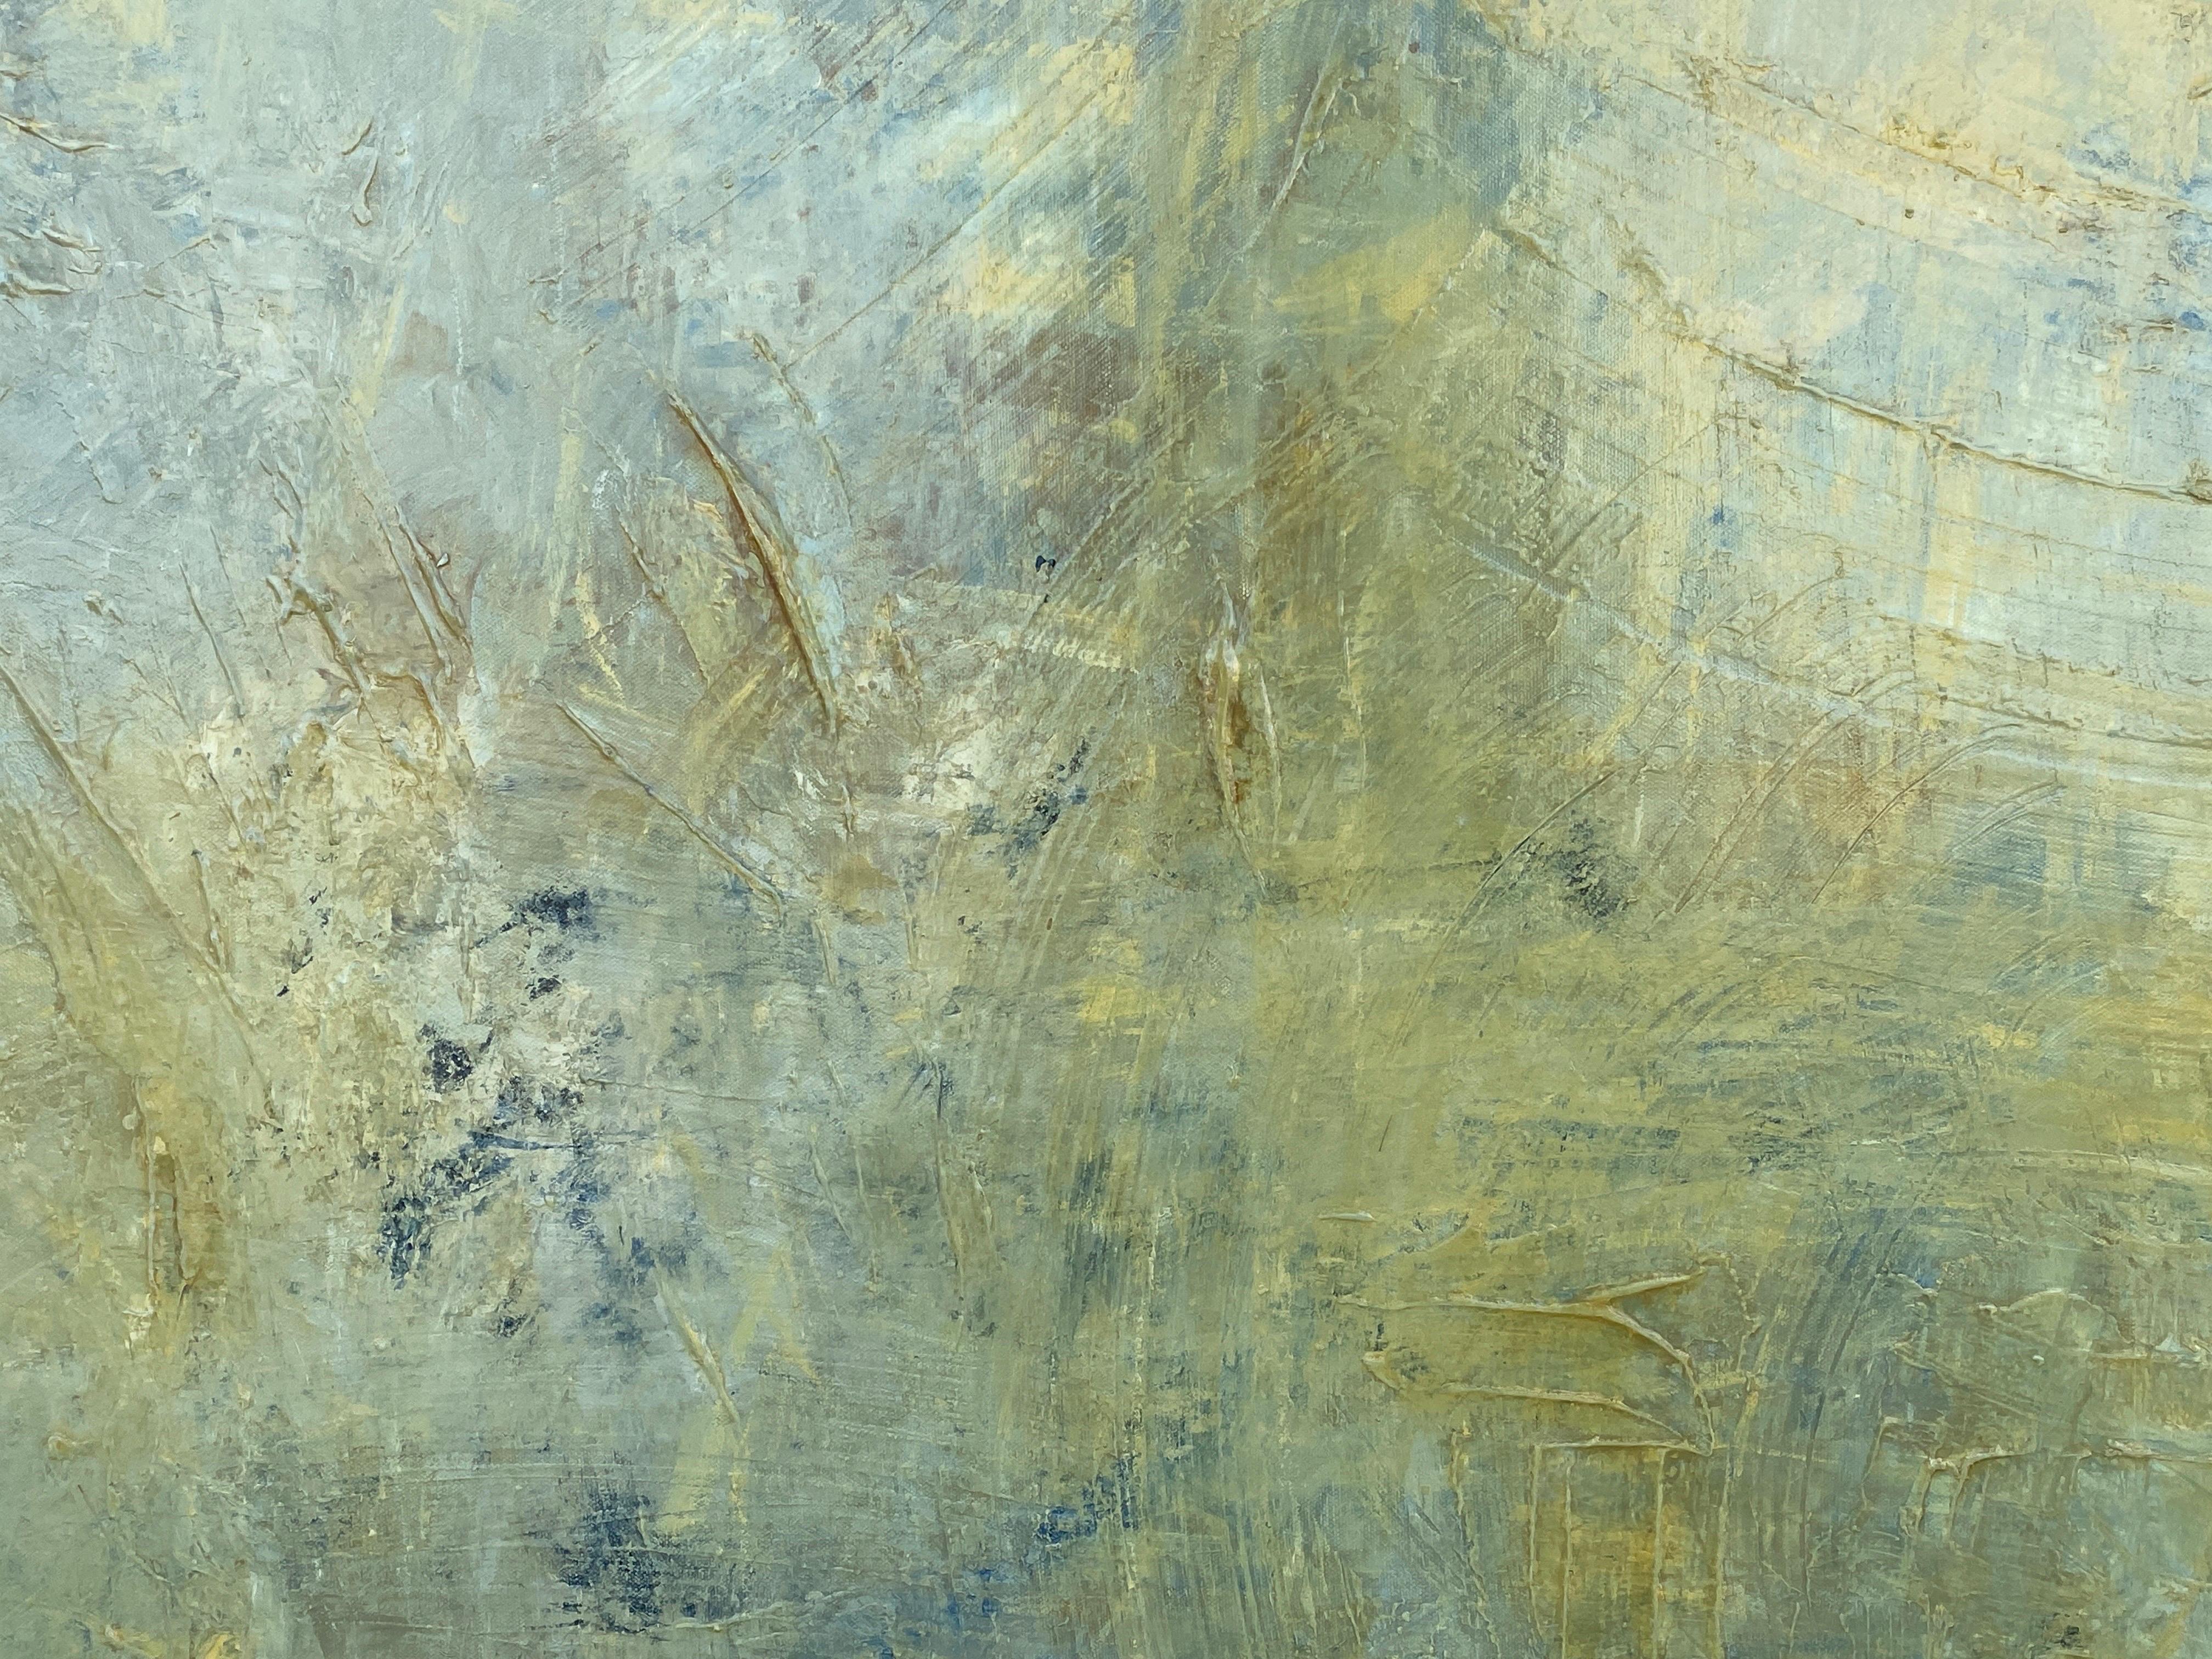 A beautiful, original abstract and gorgeous shades of citron and gold by female Arizona artist, Kathryn Henneman. Her work is in many commercial and private collections across the United States and a favorite painter of many interior designers.